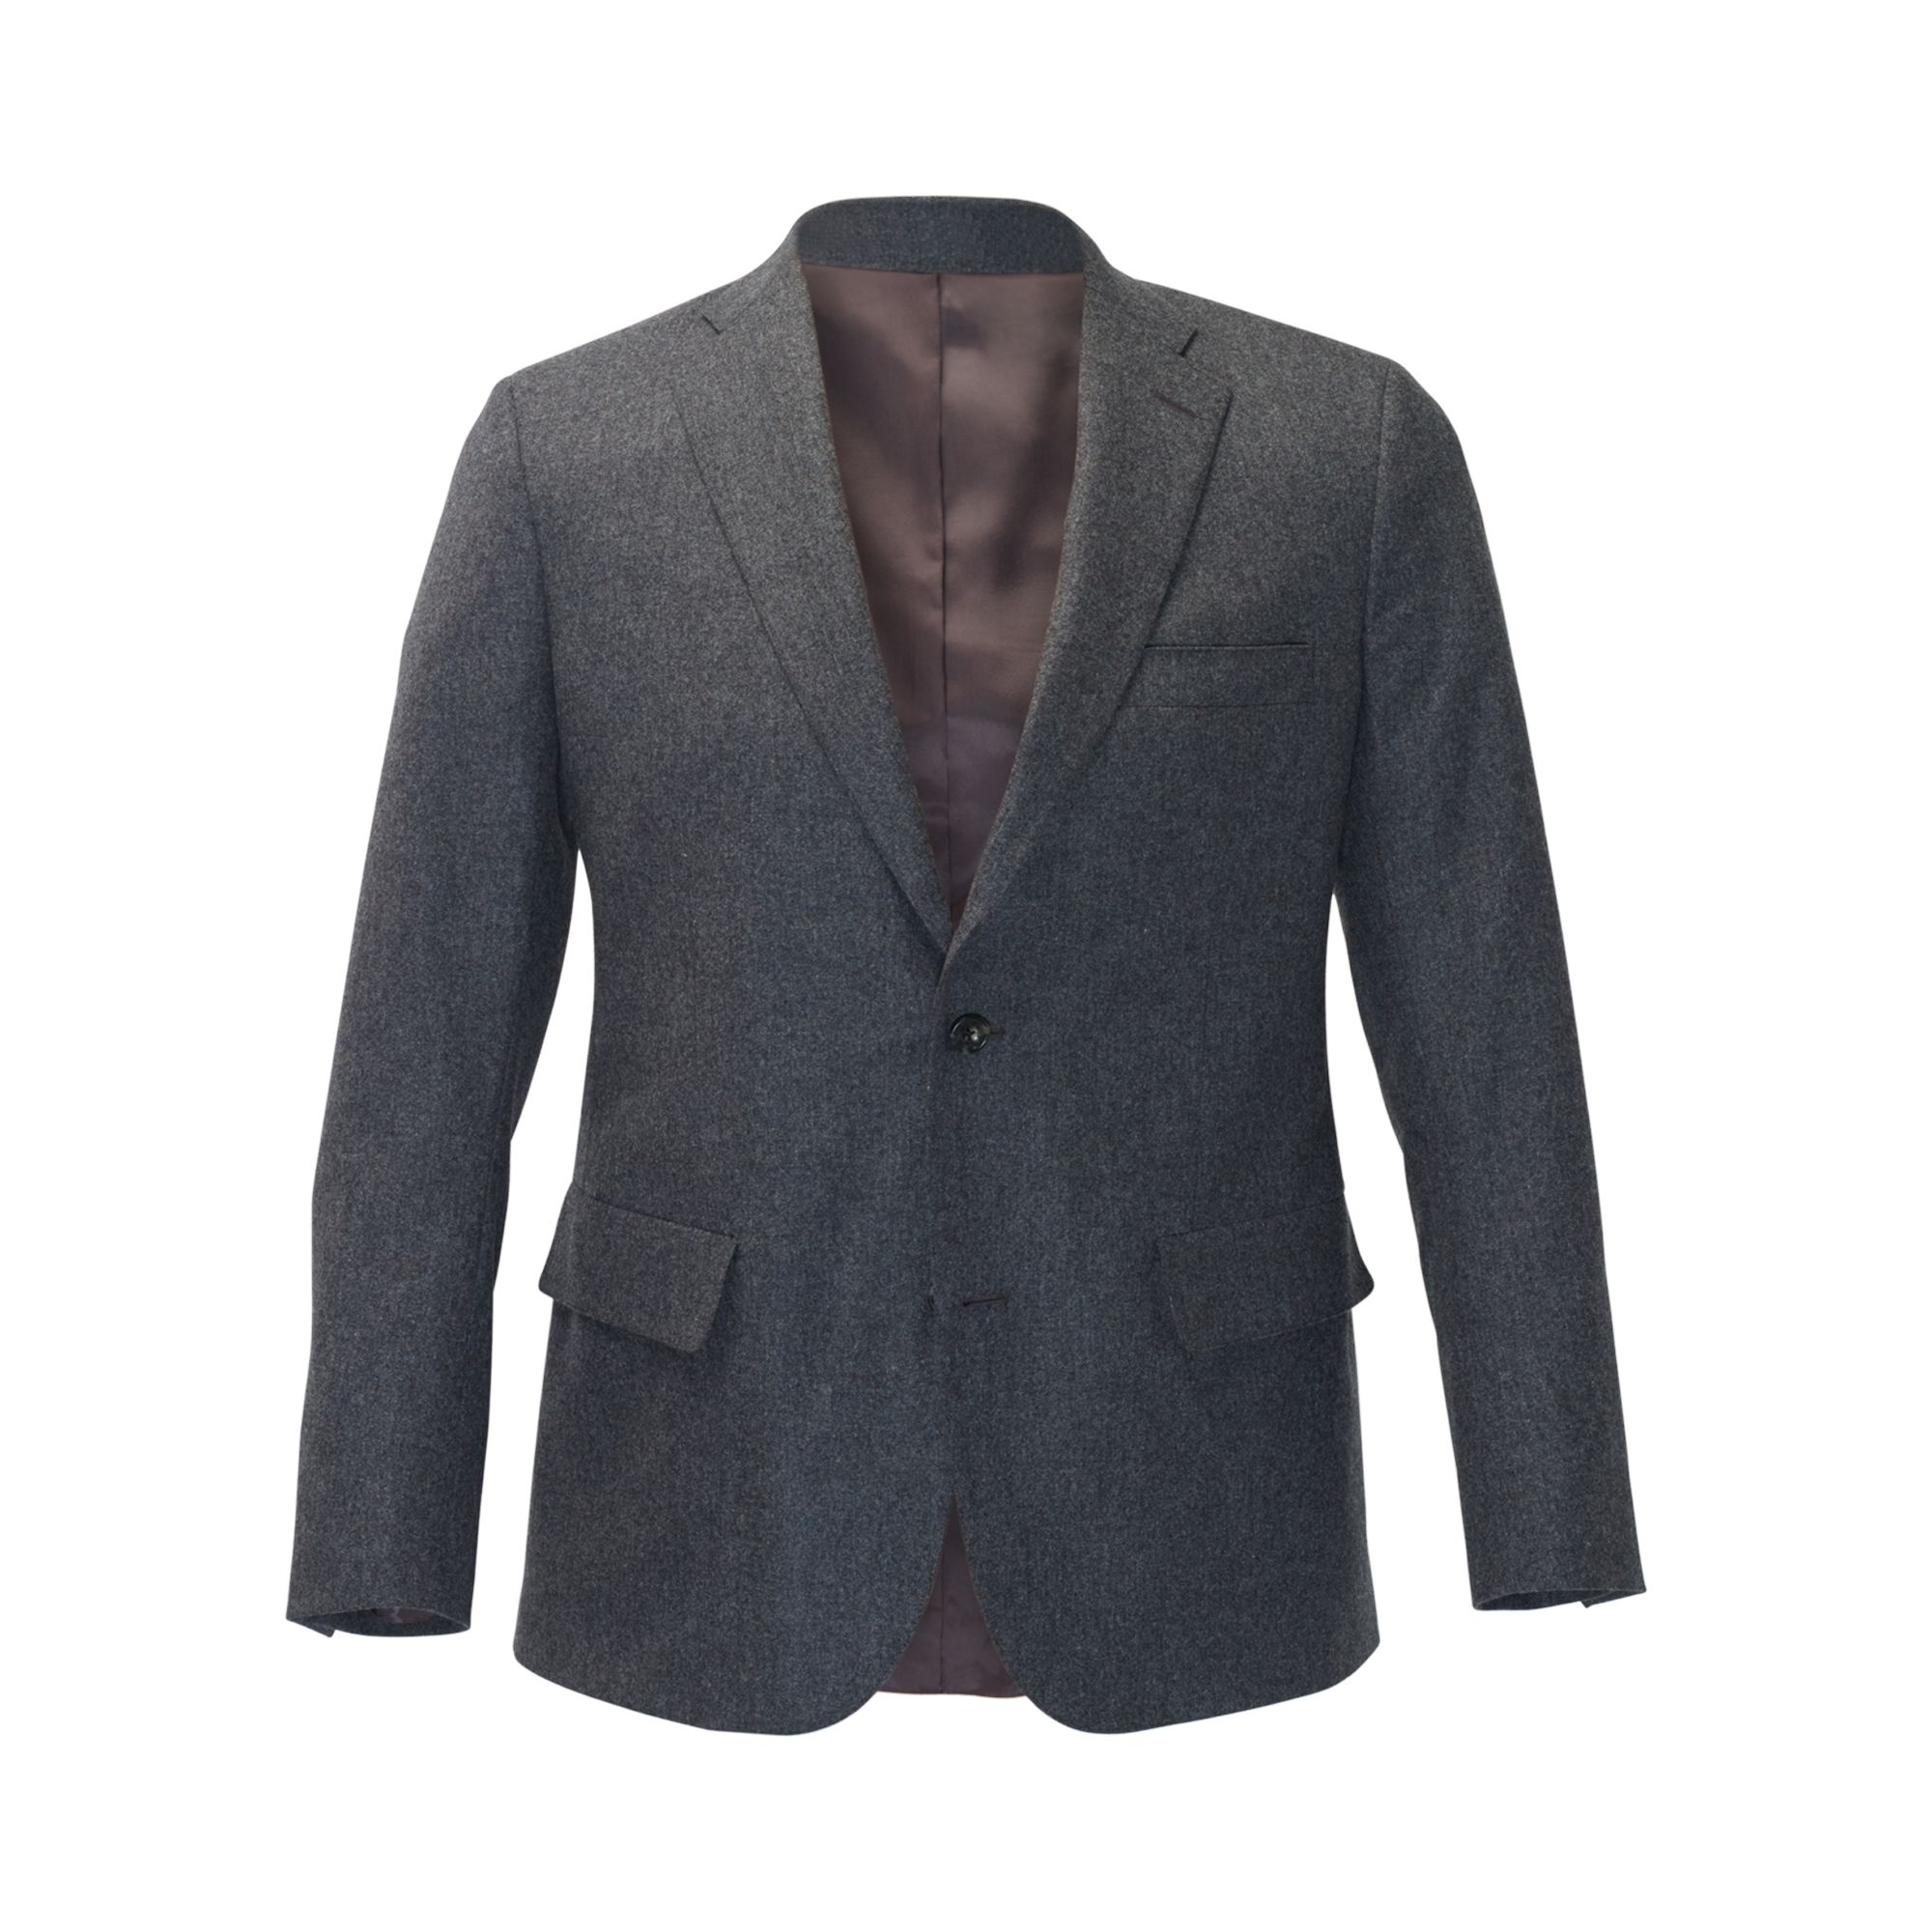 Club Monaco Made In The Usa Suit Jacket in Black for Men (Charcoal) | Lyst